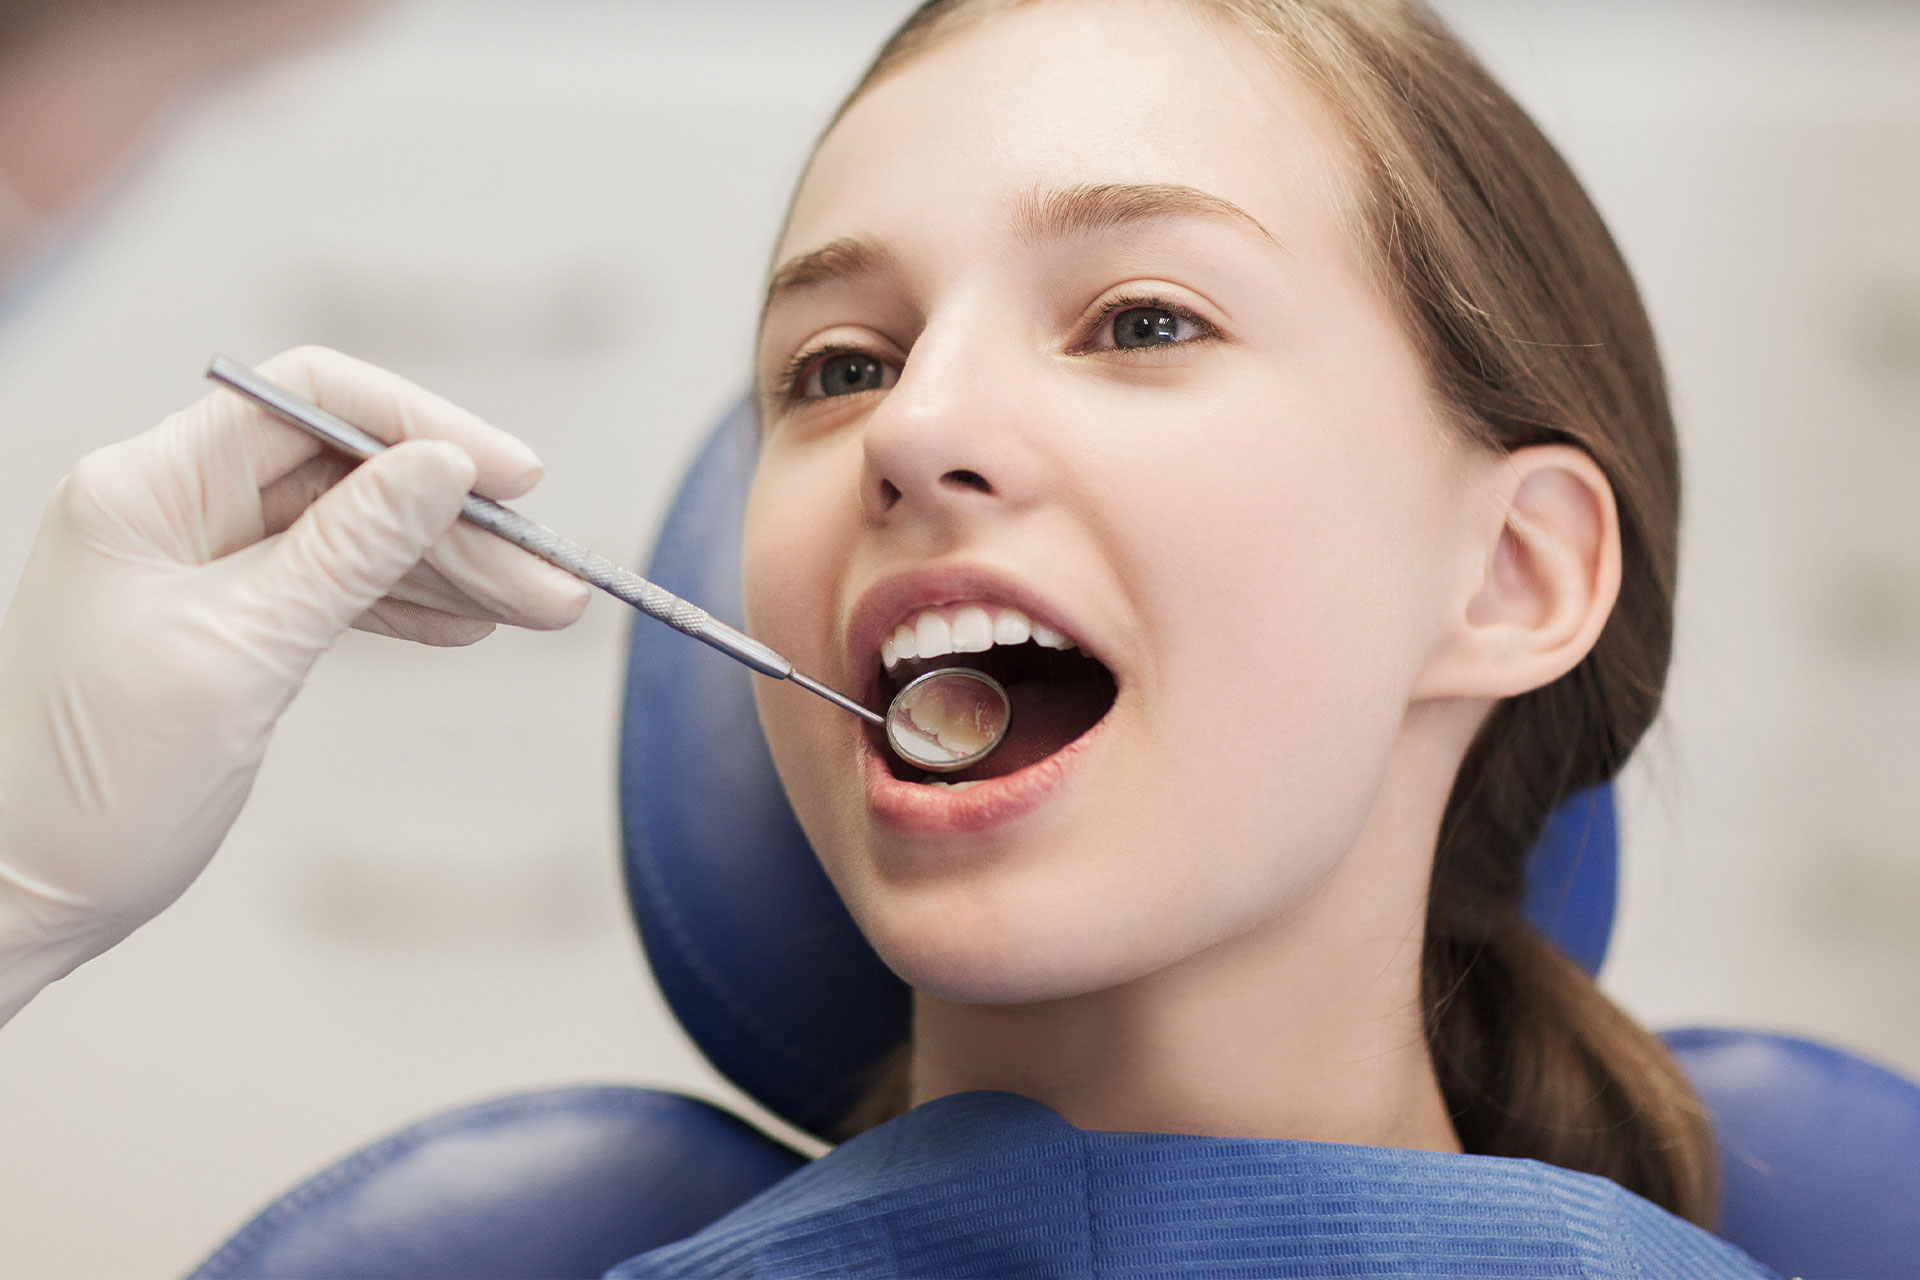 The image shows a young woman in a dental office setting, receiving dental care. She is seated in a dental chair with her mouth open, wearing a blue surgical mask and holding a small object, possibly a toothbrush or dental tool. A dentist is seen in the background, wearing gloves and working at a counter with various dental instruments.